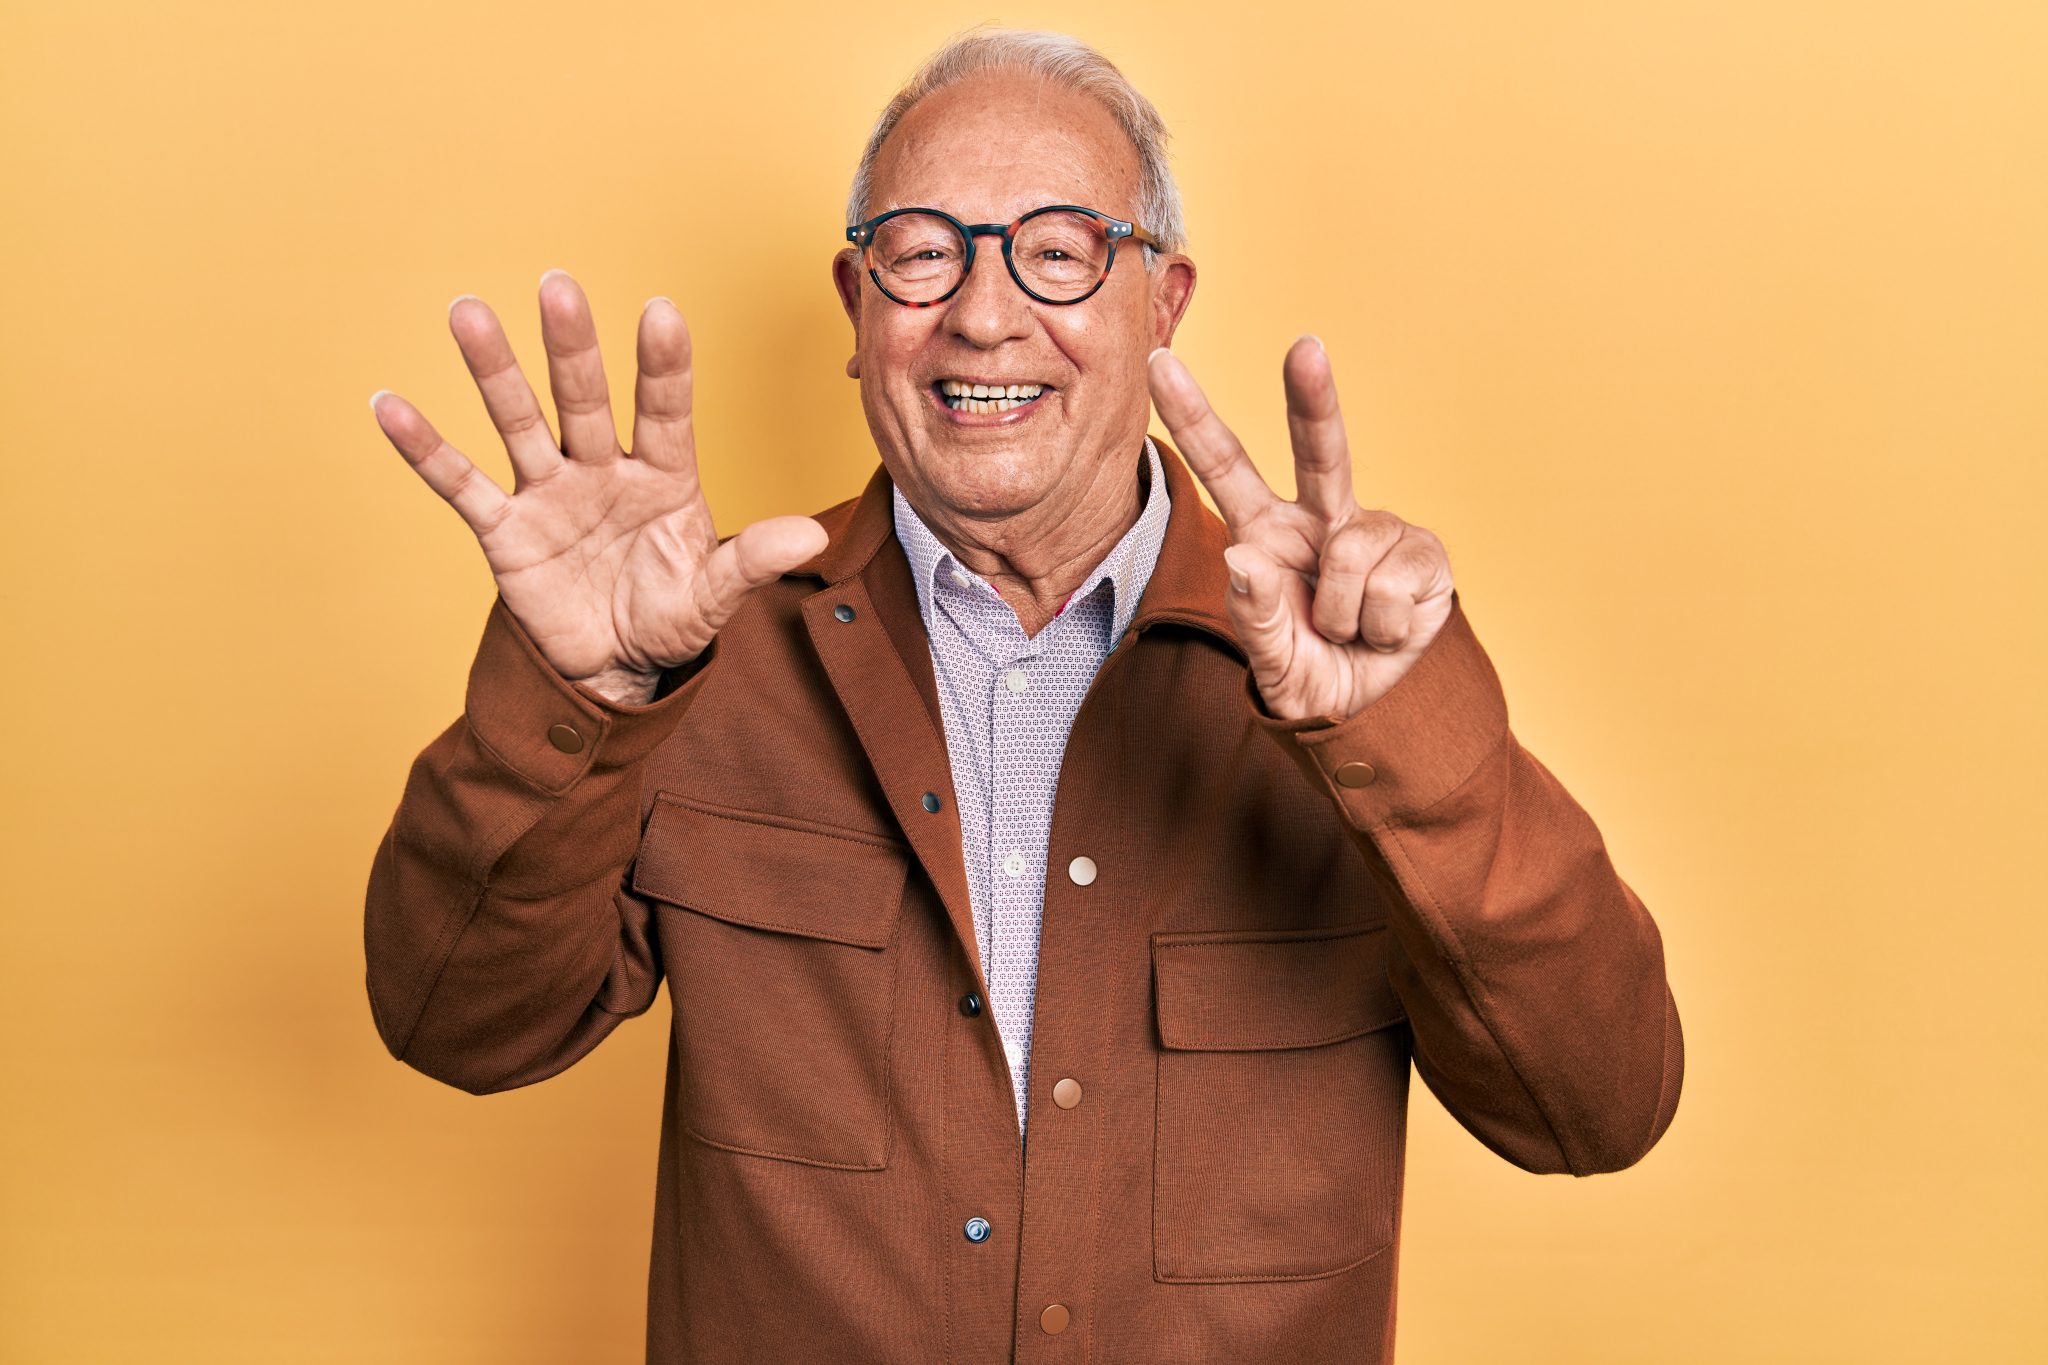 Man holding up 7 fingers. 7 simple steps to heart healthy living